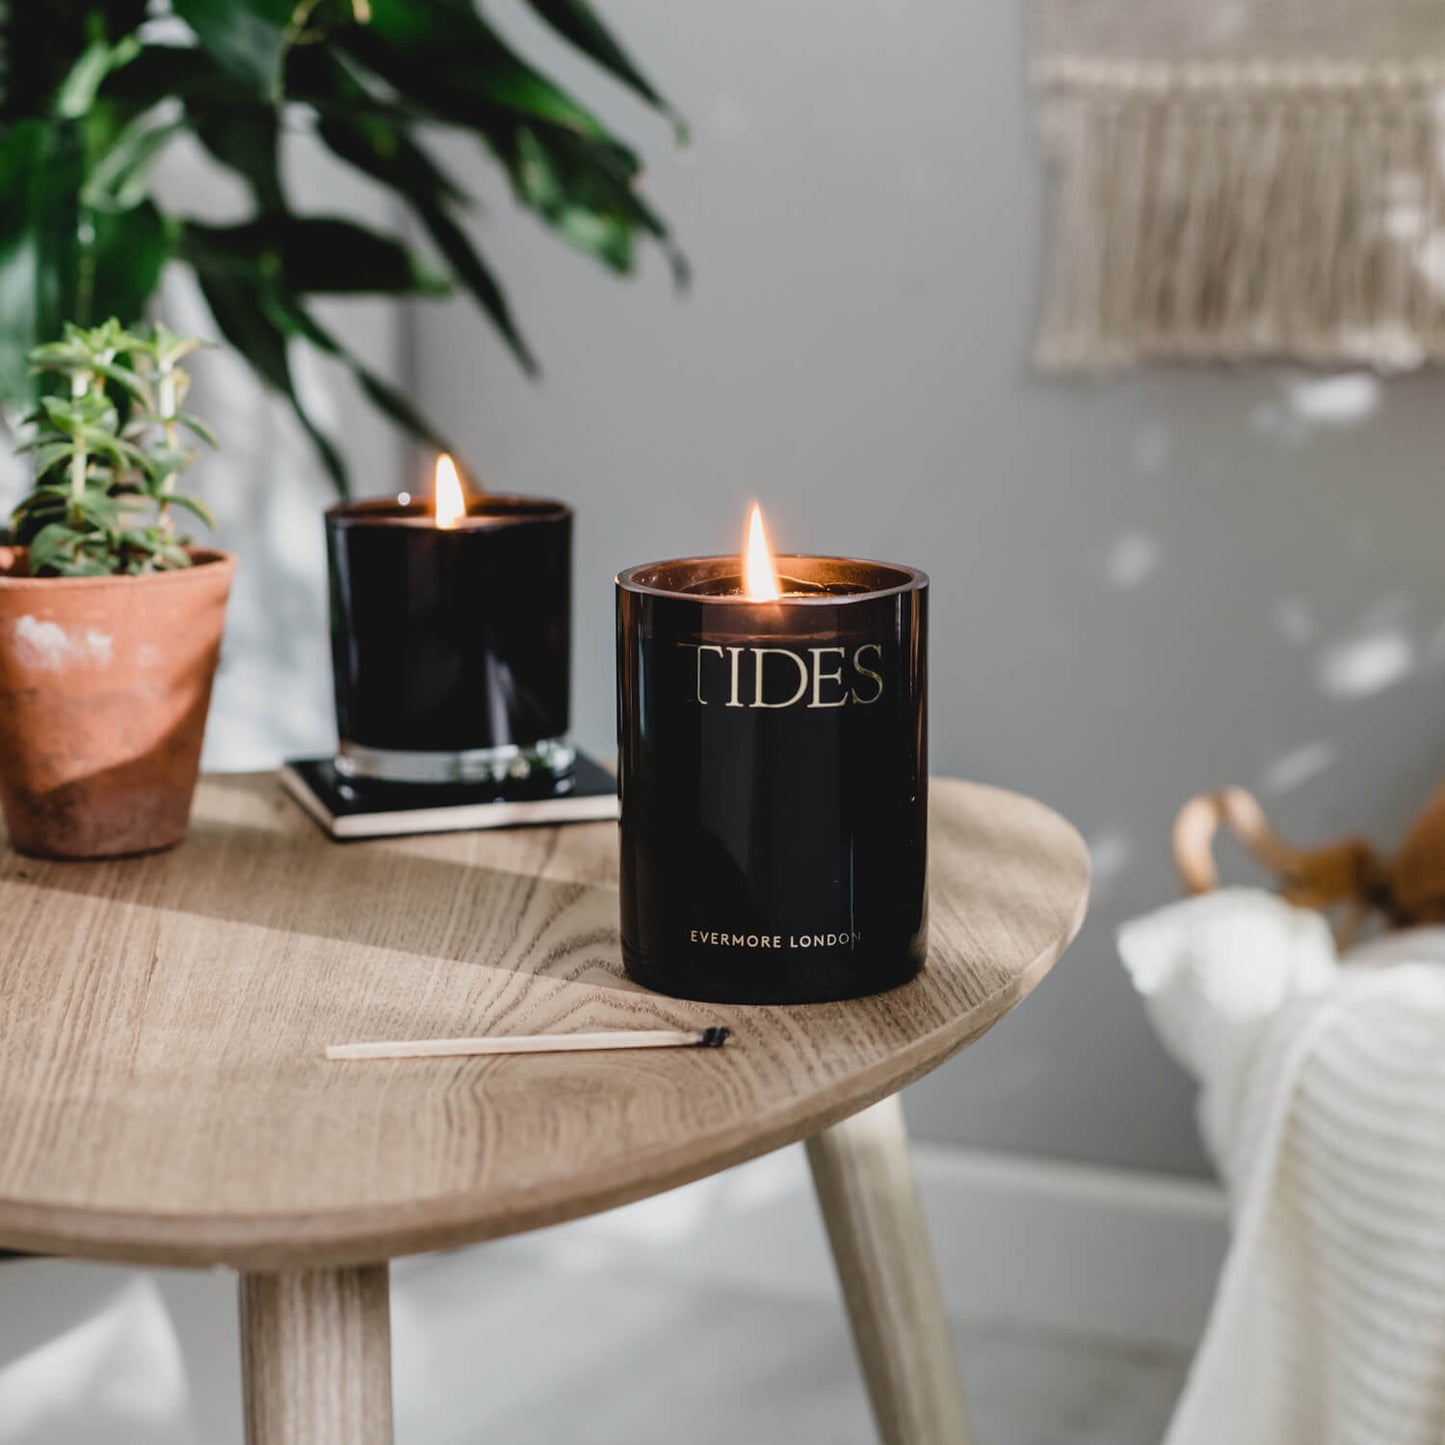 Evermore Tides Scented Candle - Osmology Scented Candles & Home Fragrance